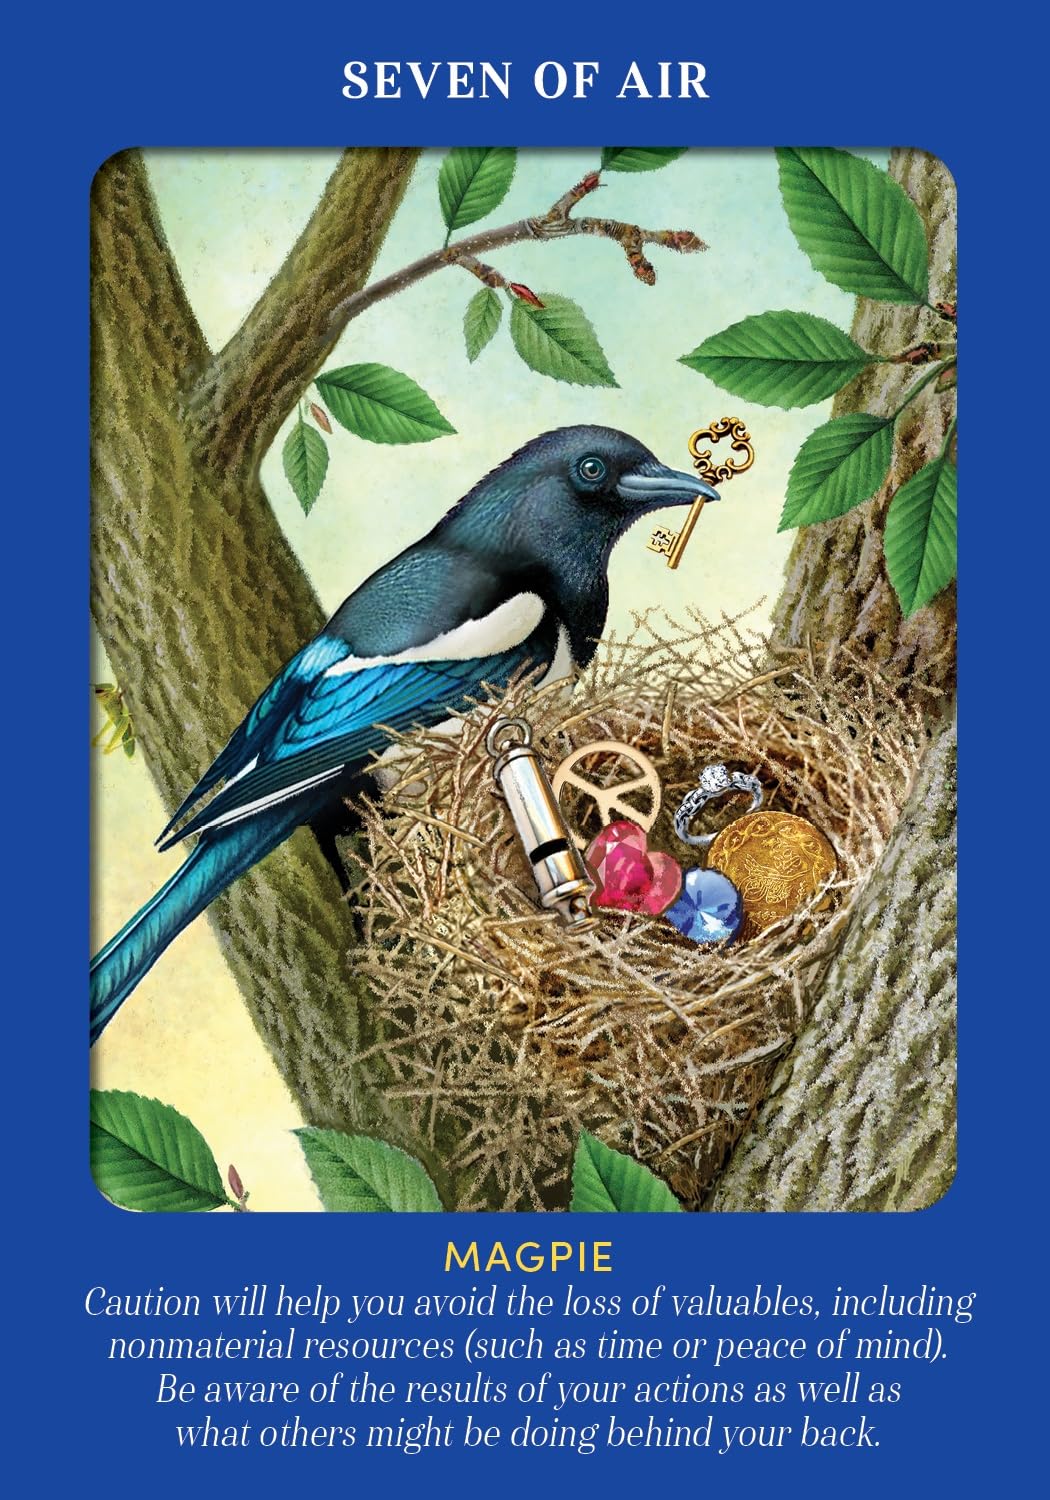 Animal Guides Tarot: A 78-Card Deck and Guidebook